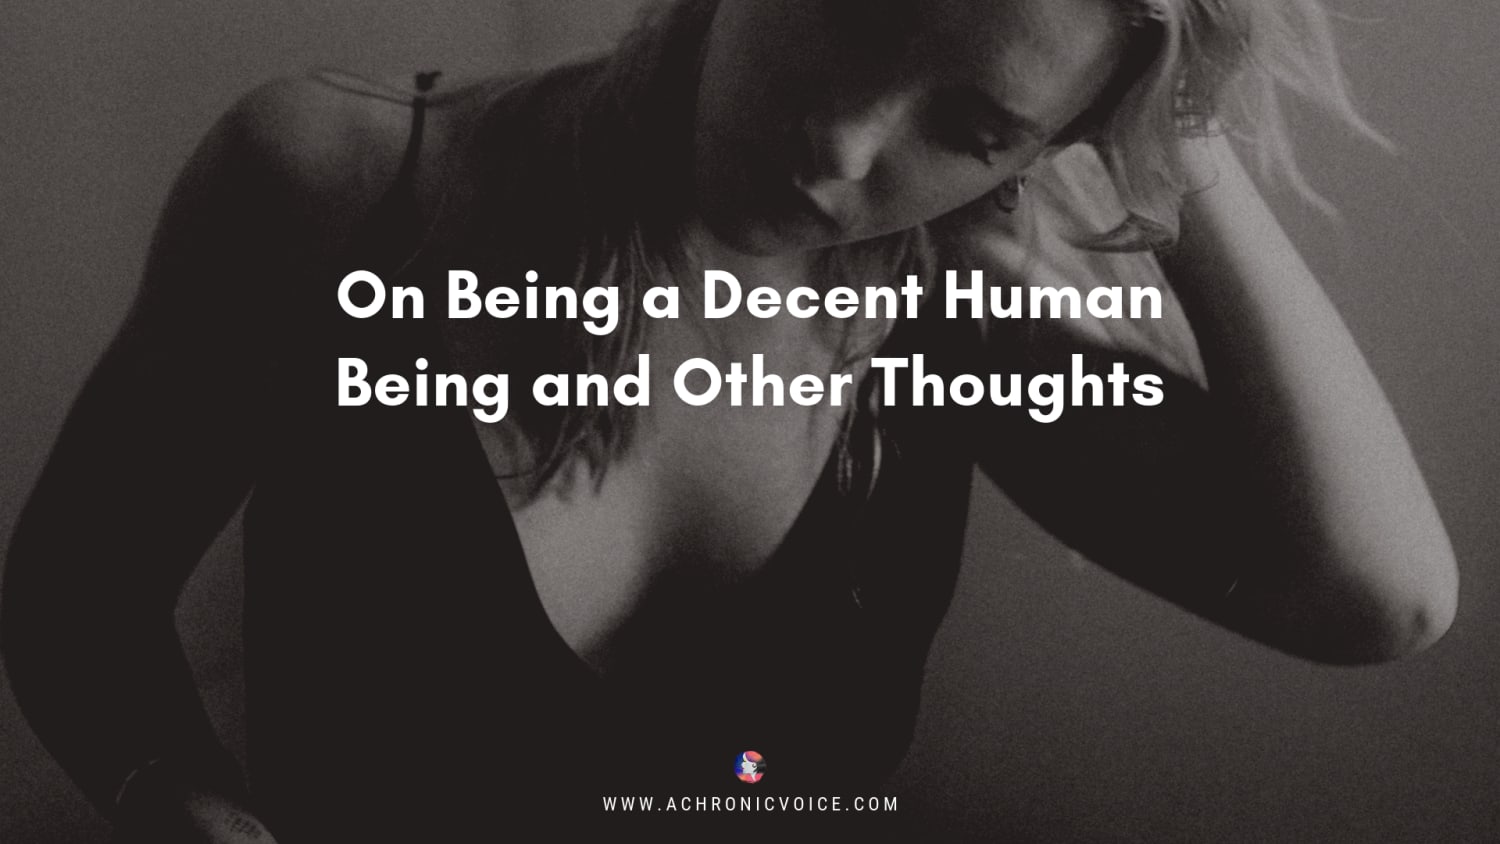 On Being a Decent Human Being and Other Thoughts